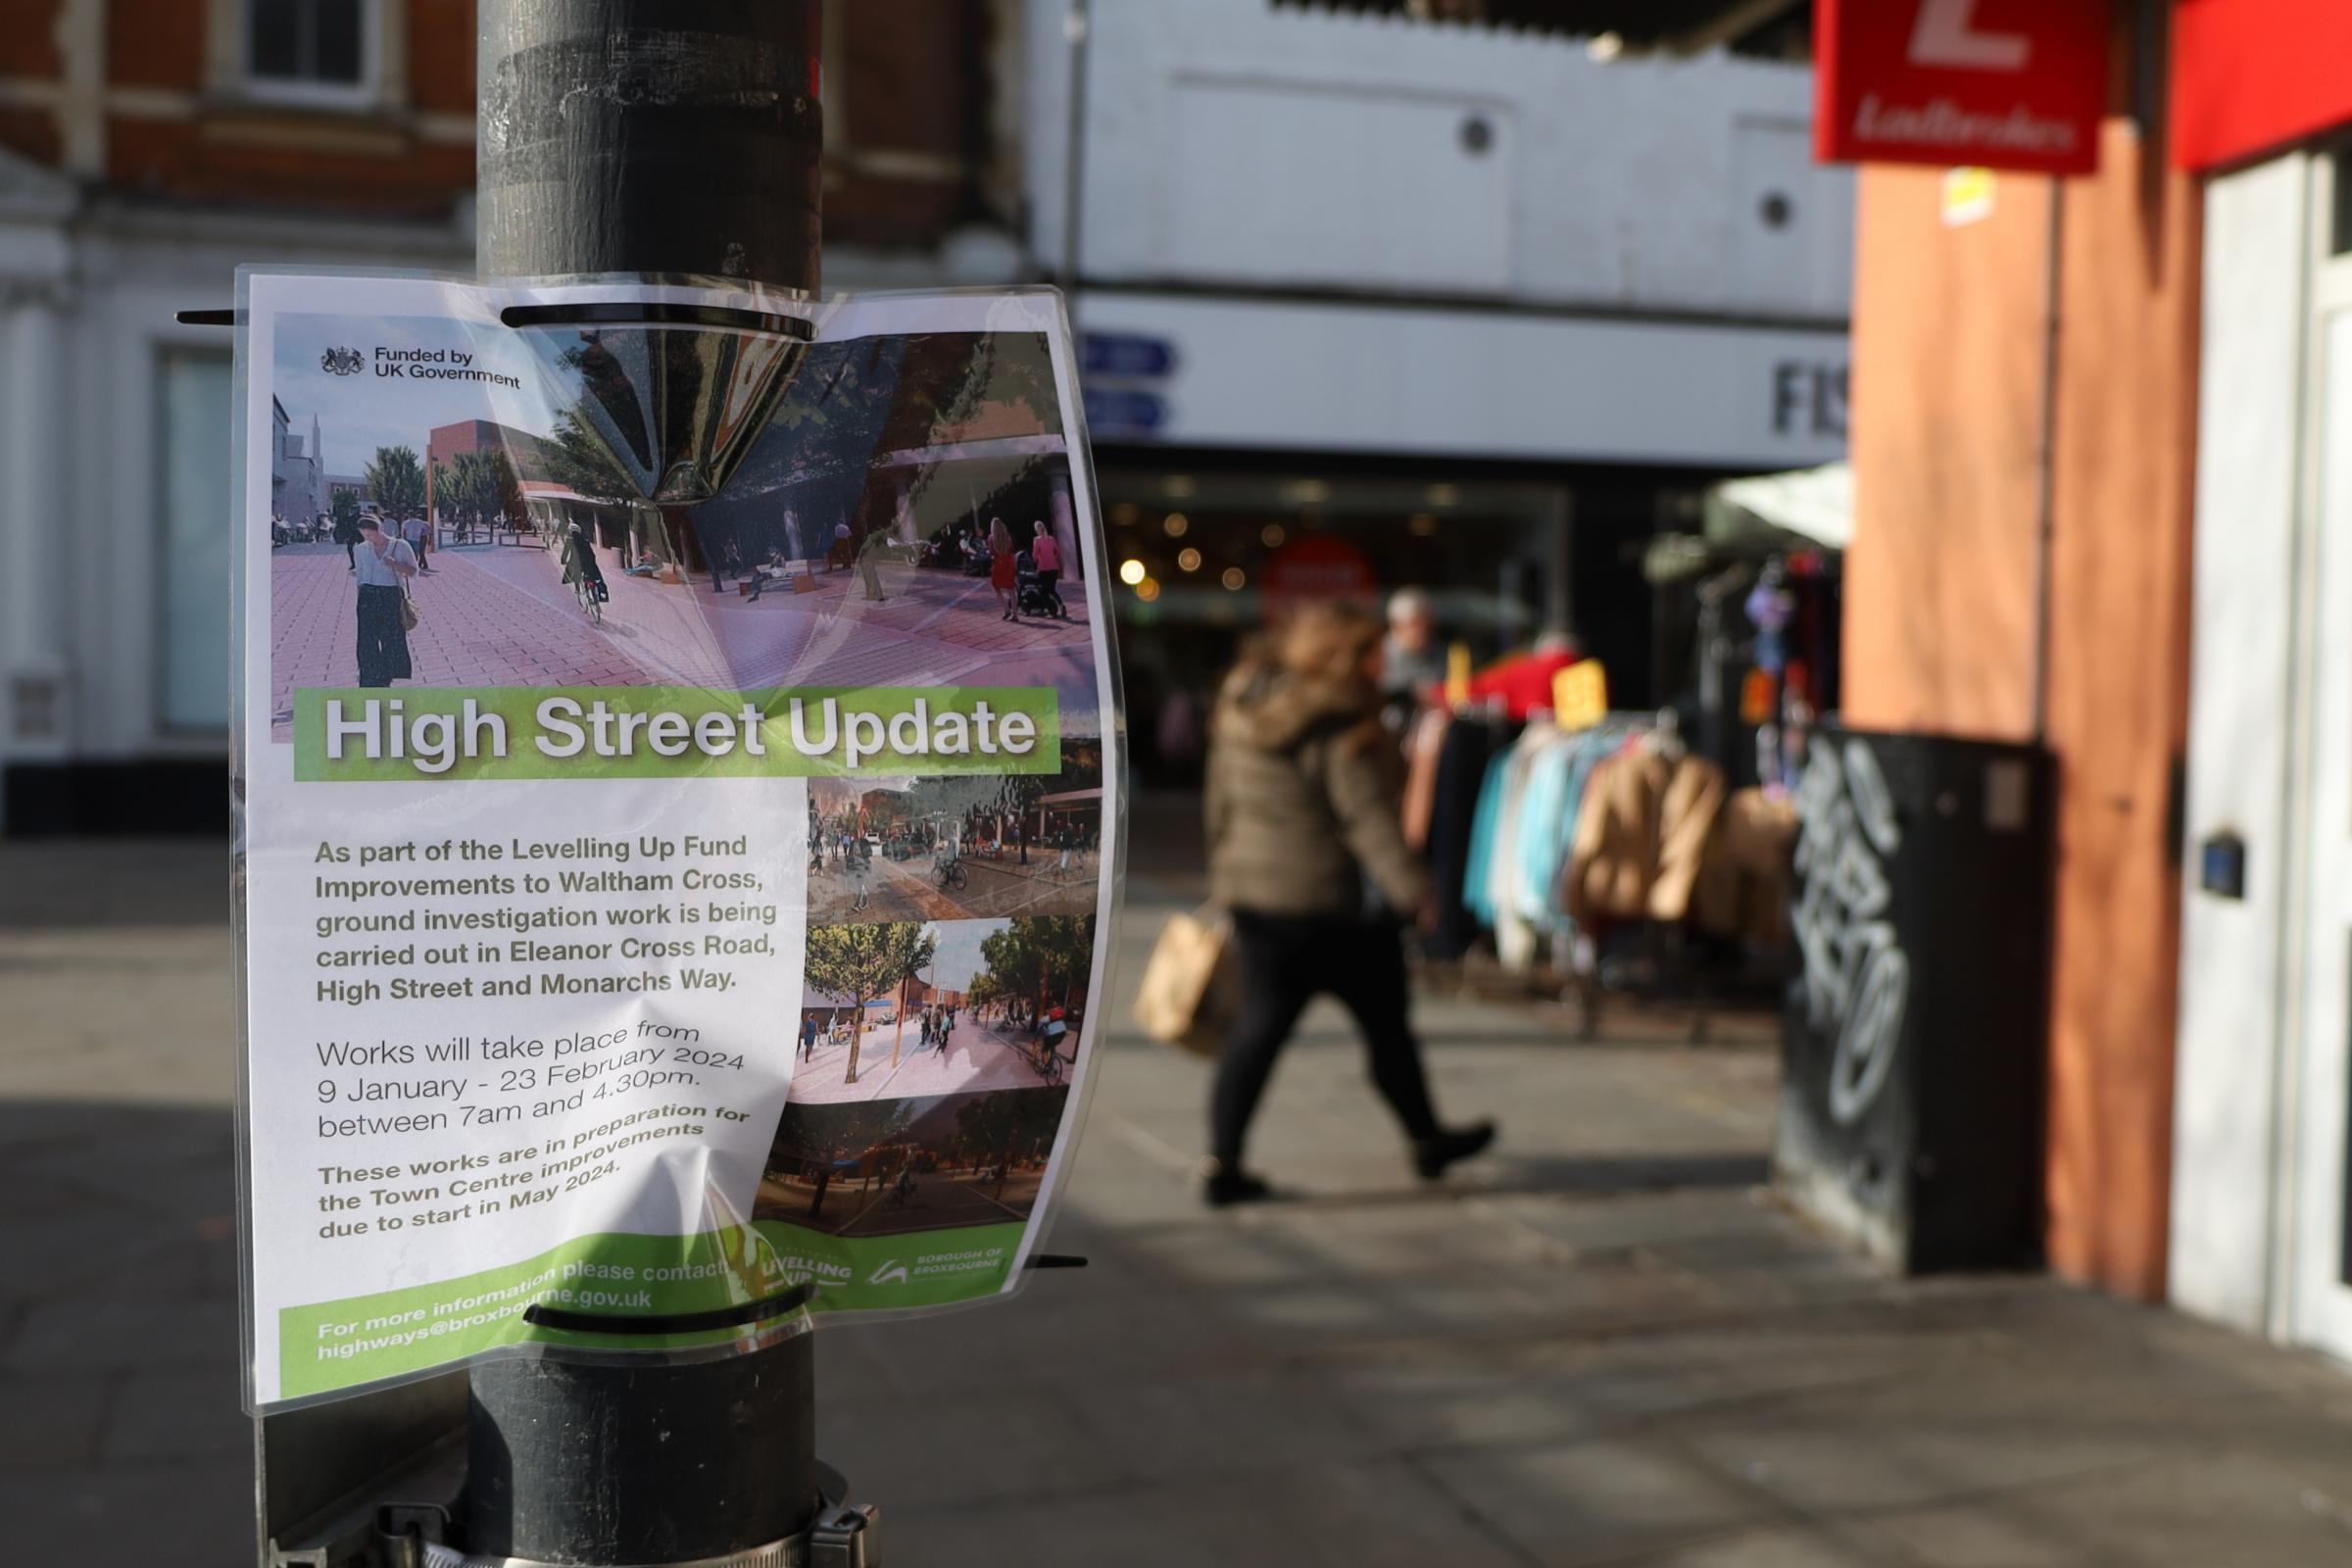 A High Street Update sign in Waltham Cross, Hertfordshire, ahead of a Levelling Up Fund-backed regeneration project in the town centre.